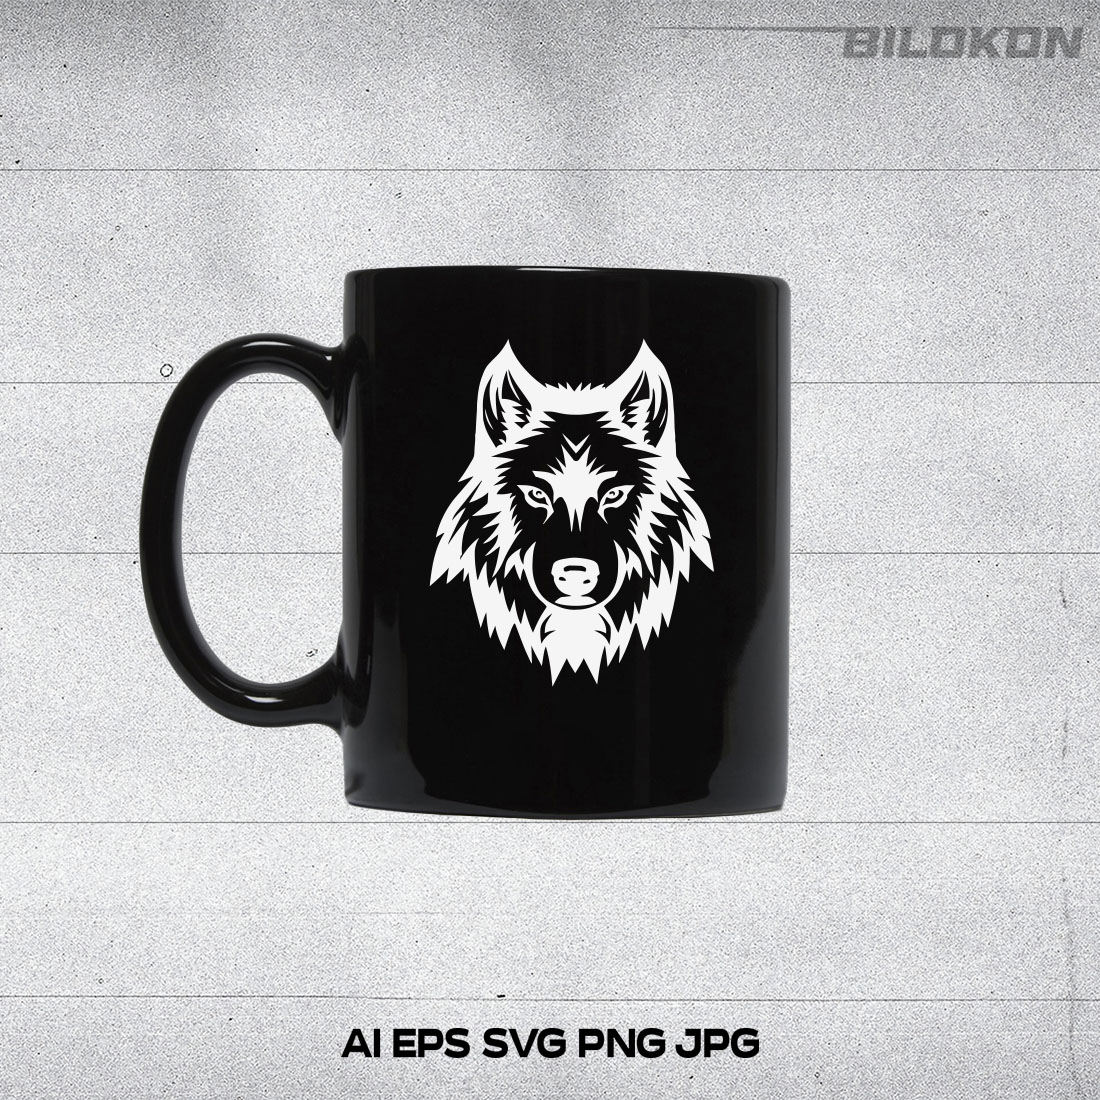 Black coffee mug with a white wolf on it.